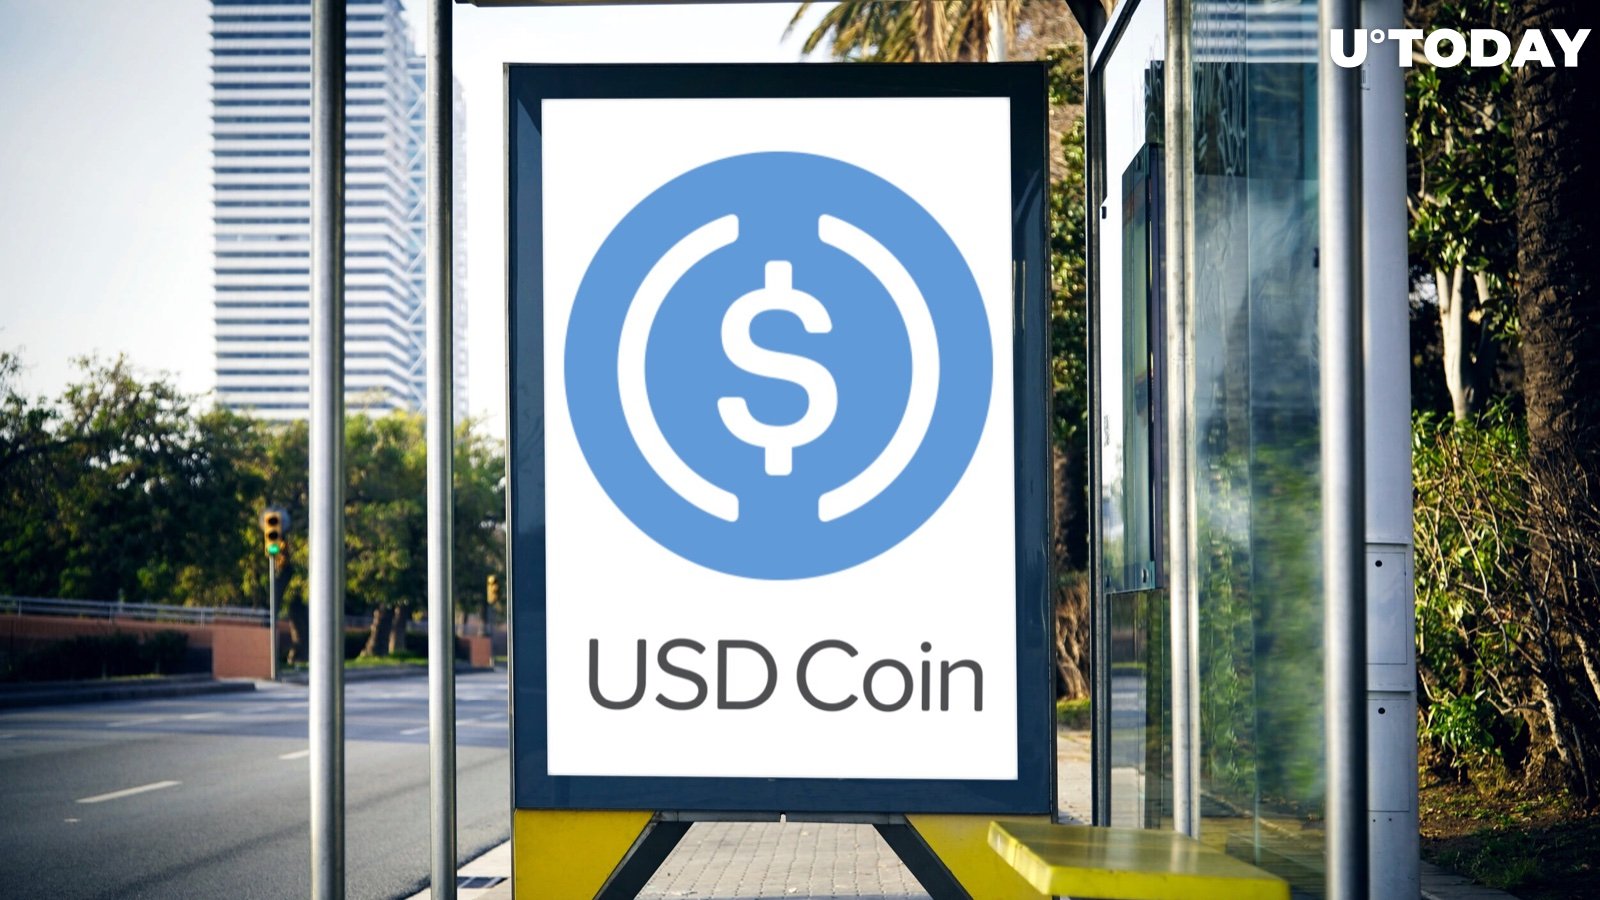 Coinbase CEO Brian Armstrong Criticized for Promoting USDC After Bitfinex-Tether Scandal